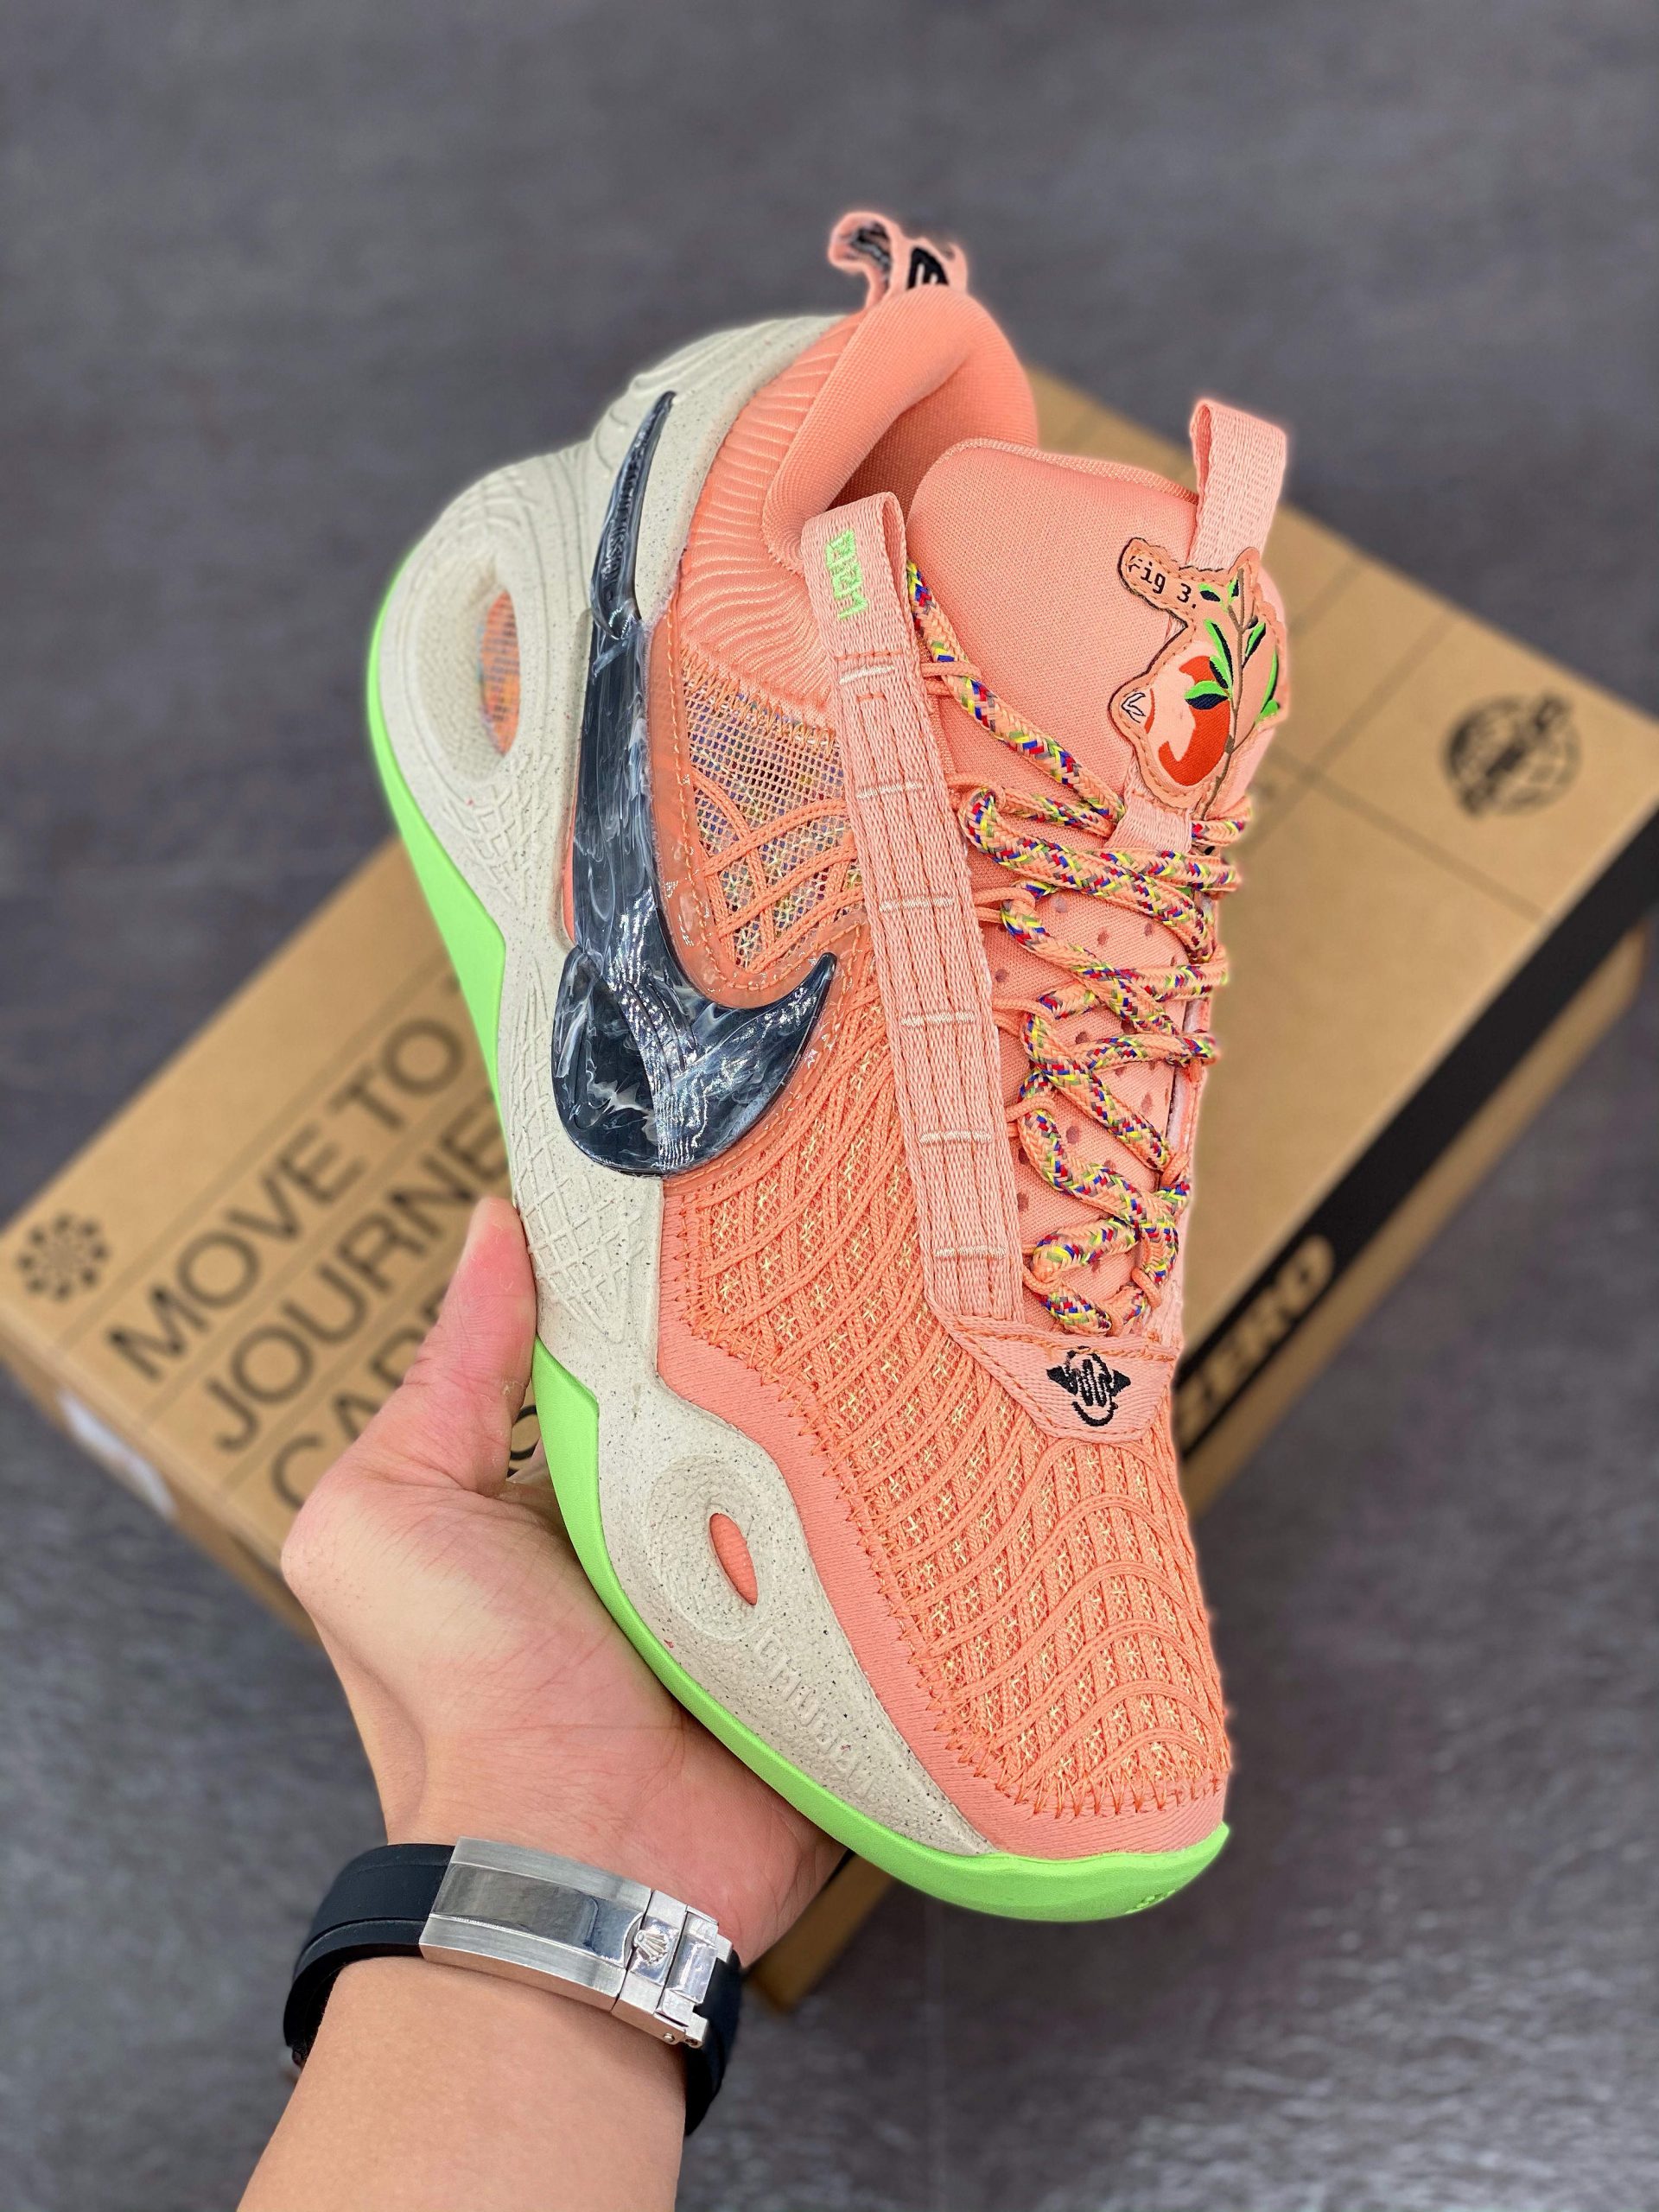 Nike Cosmic Unity Apricot Agate/Black-Lime Glow Shoes